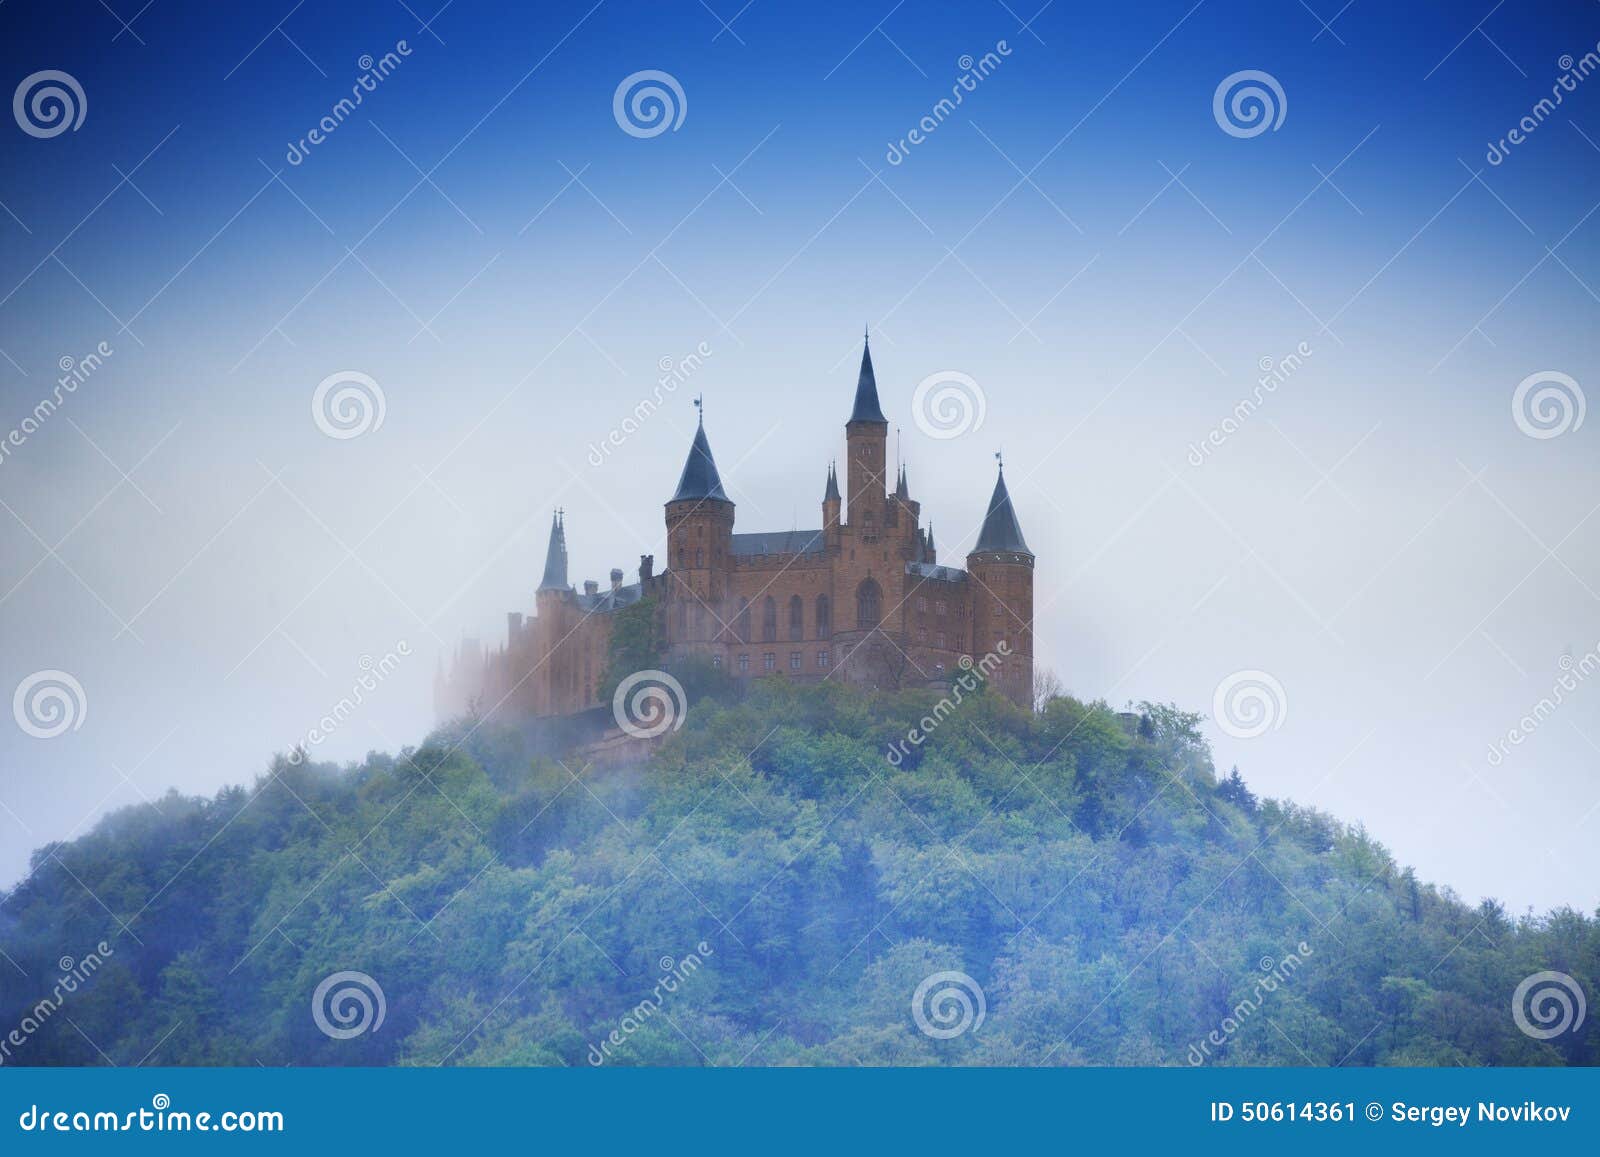 amazing view of hohenzollern castle in haze